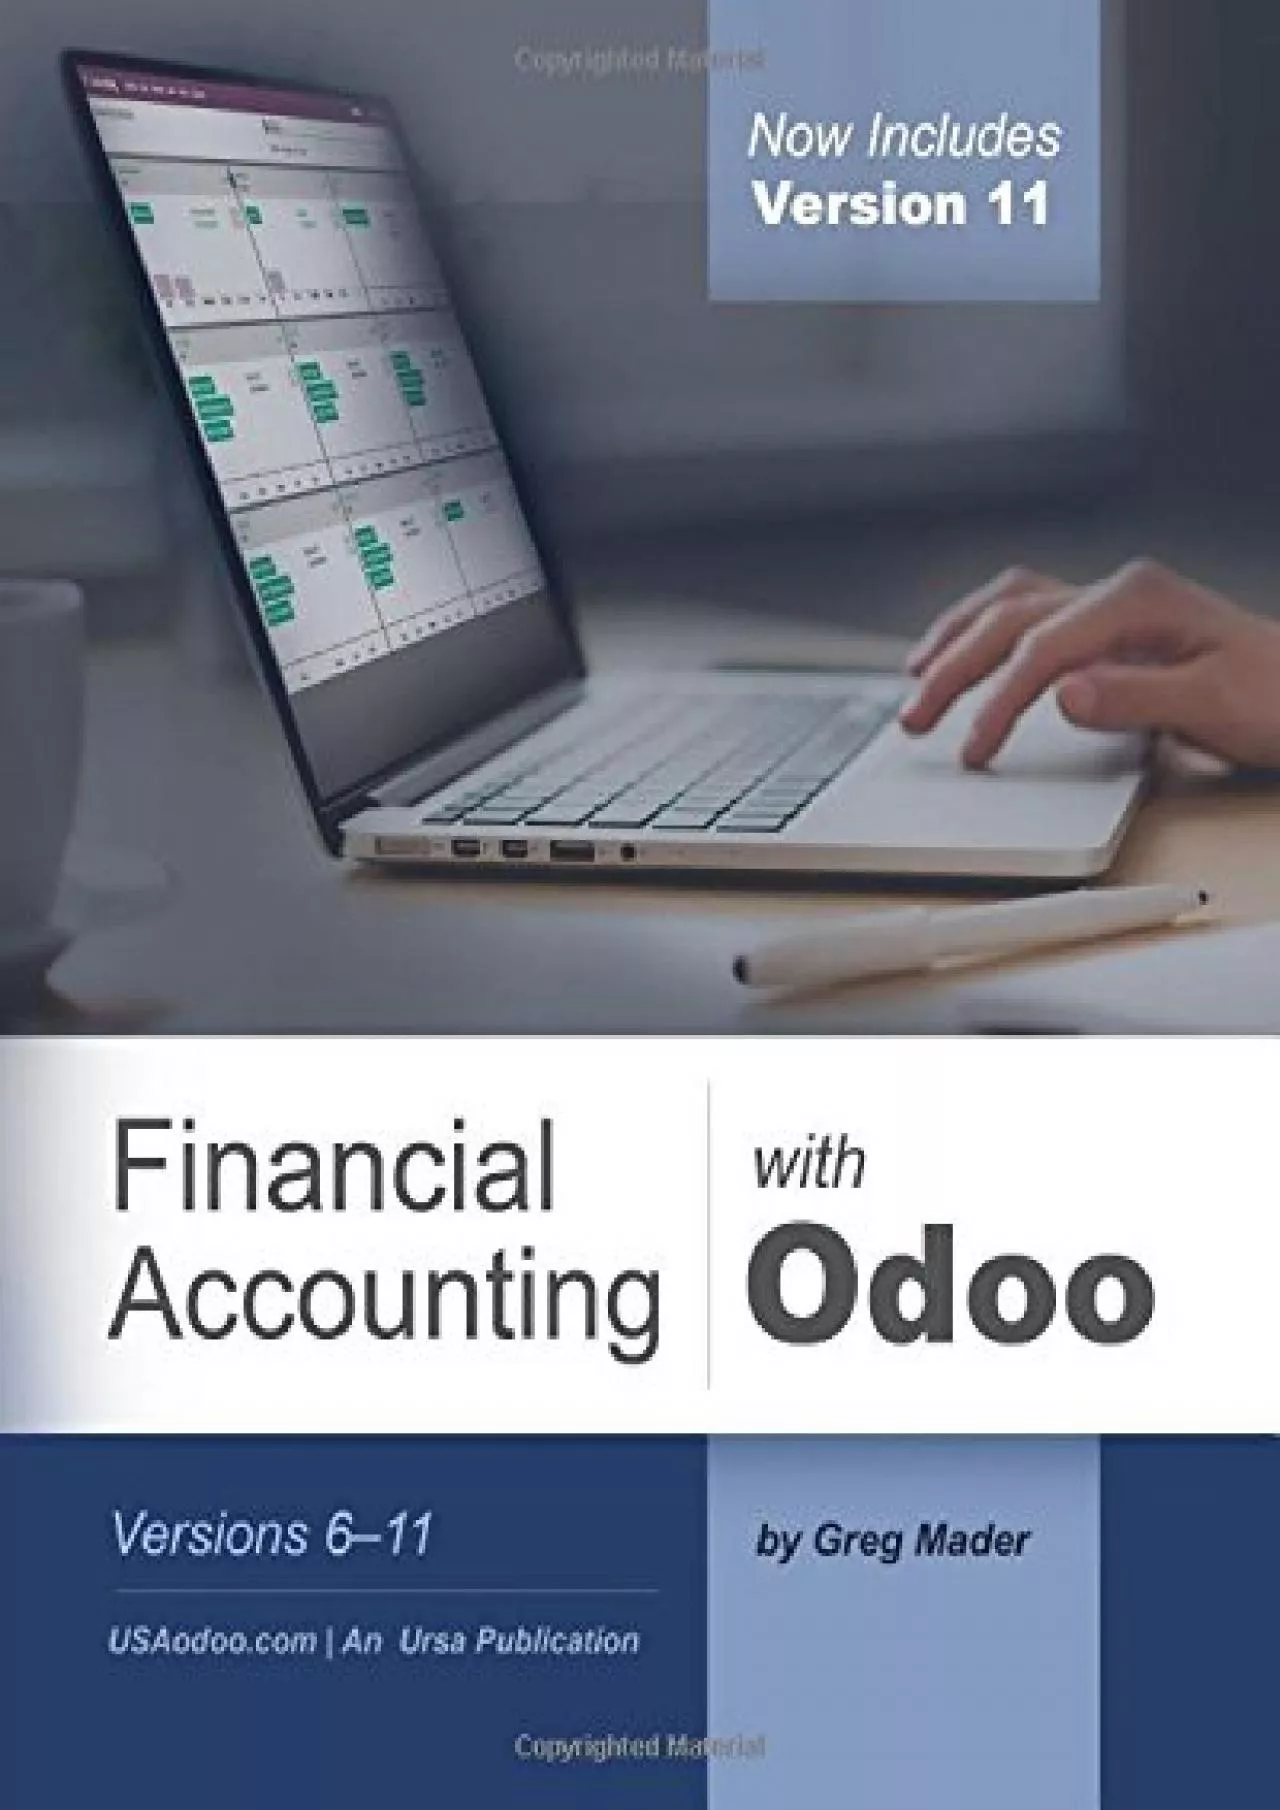 Financial Accounting with Odoo, Third Edition: Versions 6-11